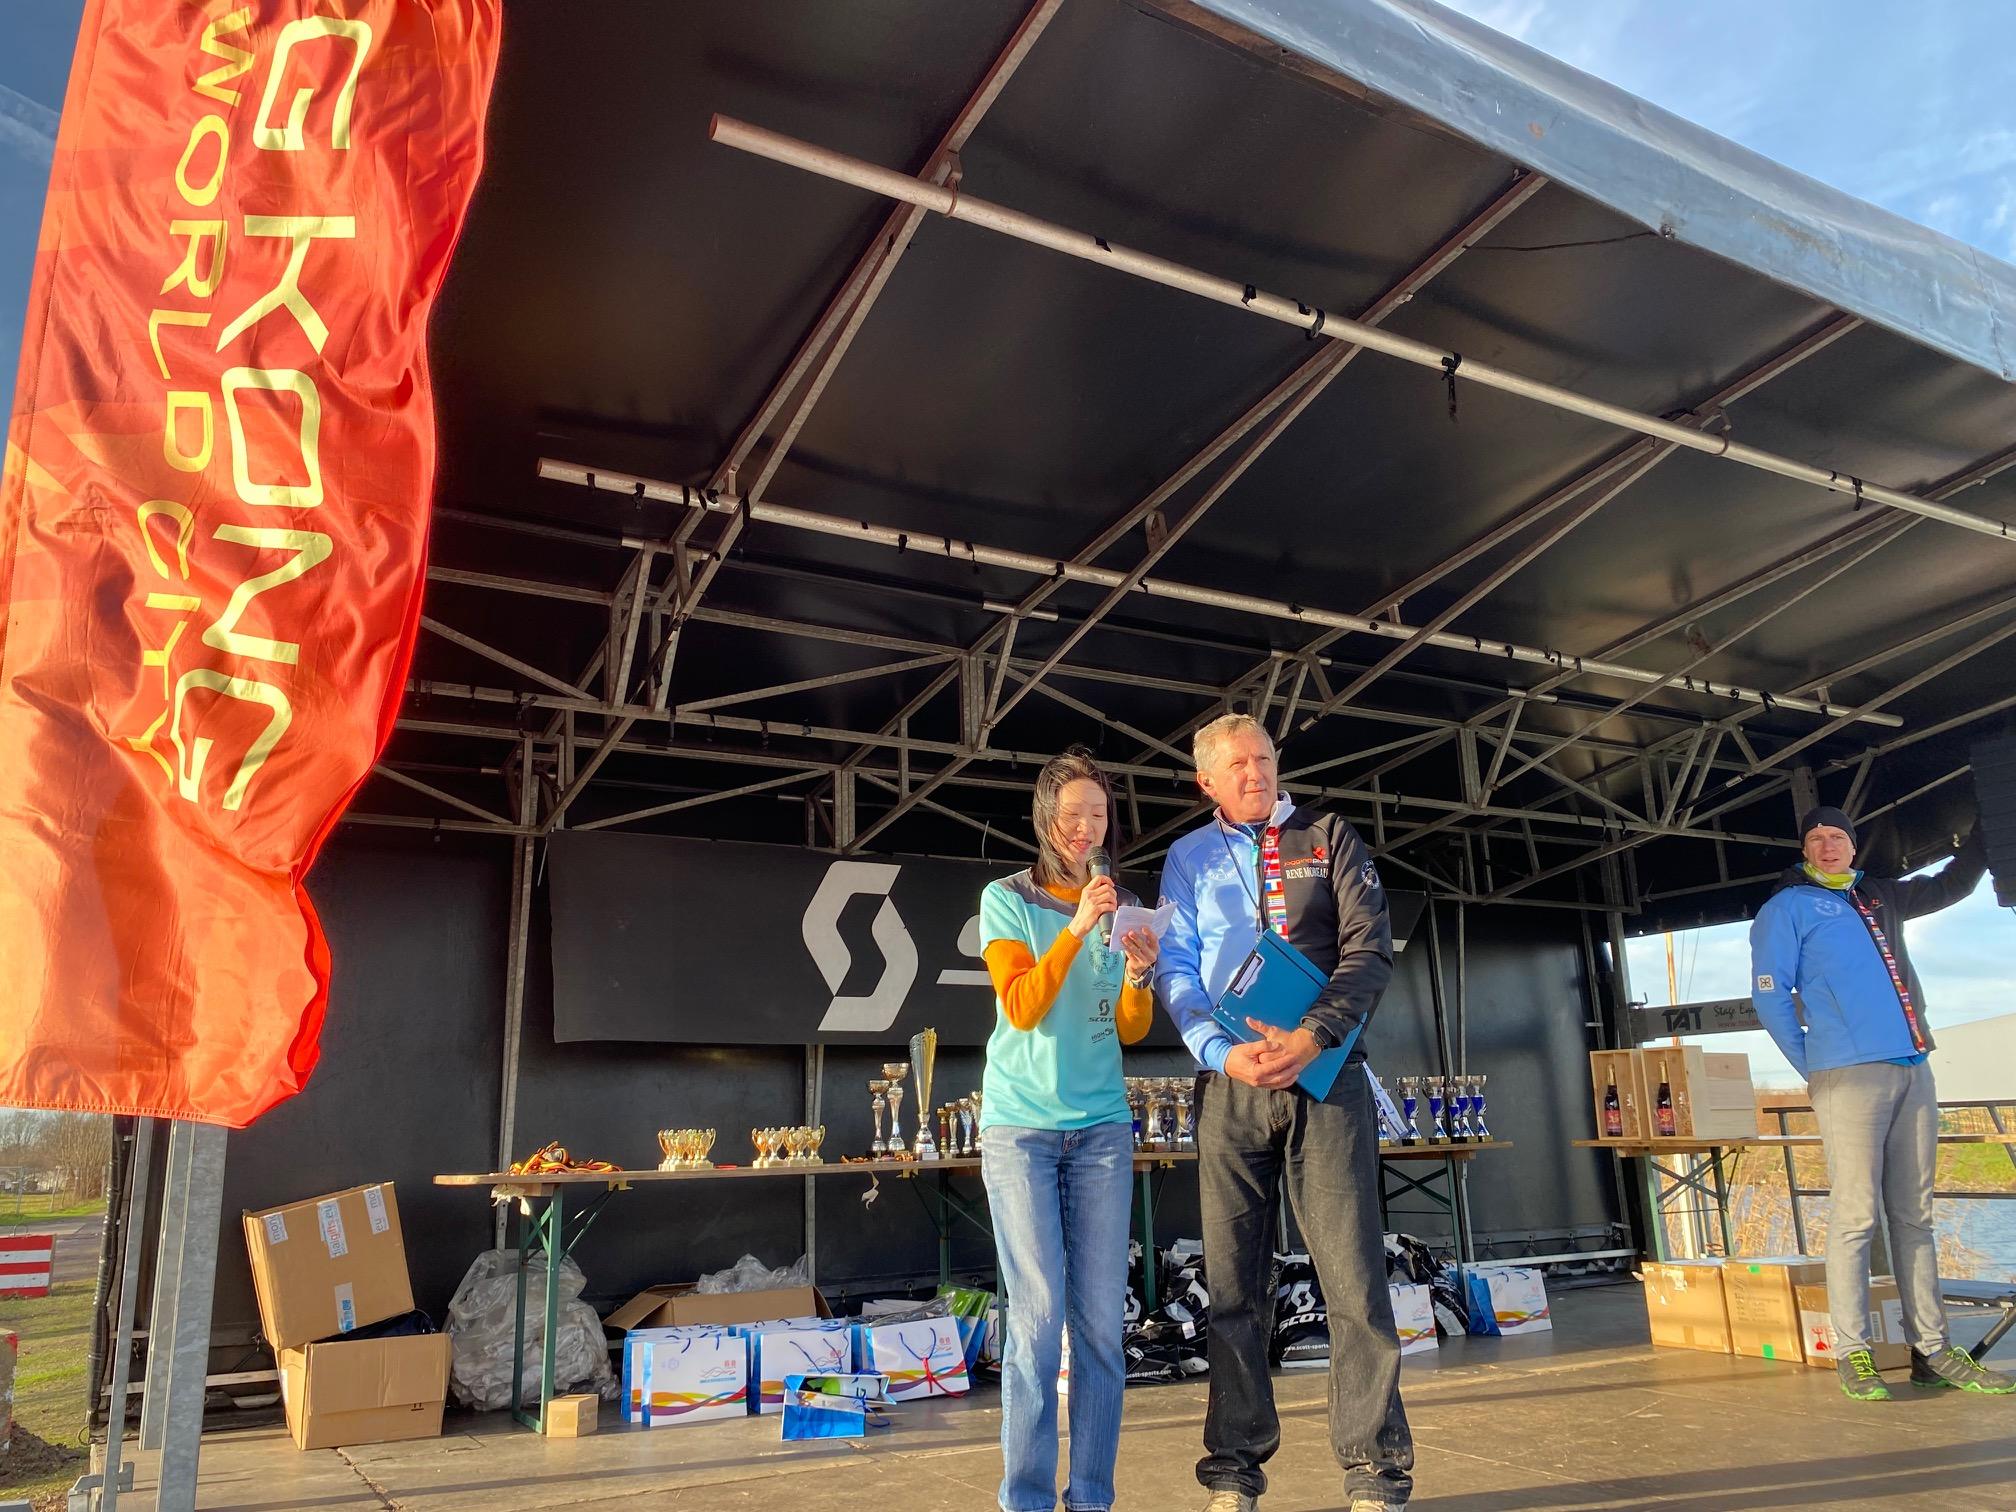 Assistant Representative of the Hong Kong Economic and Trade Office in Brussels, Miss Annie Loong (left) addressed the participants of the 2023 Run & Bike event held in Vilvoorde, Belgium on January 7 (Brussels time).